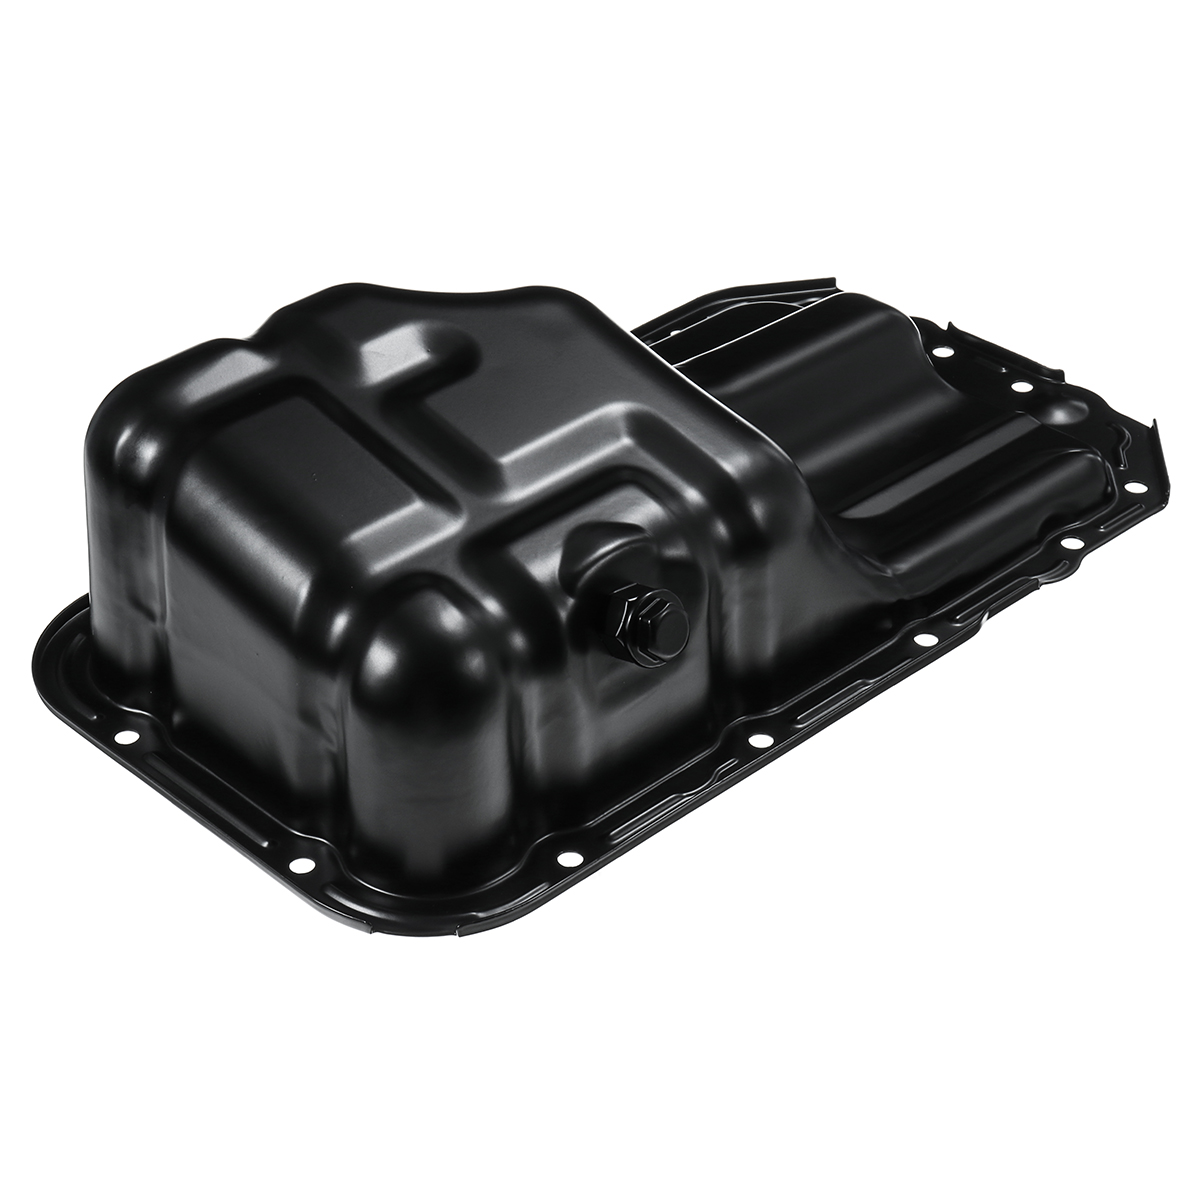 Oil Sump Pan Fit for MAZDA 2 MK2 / MAZDA 3 Stainless Steel